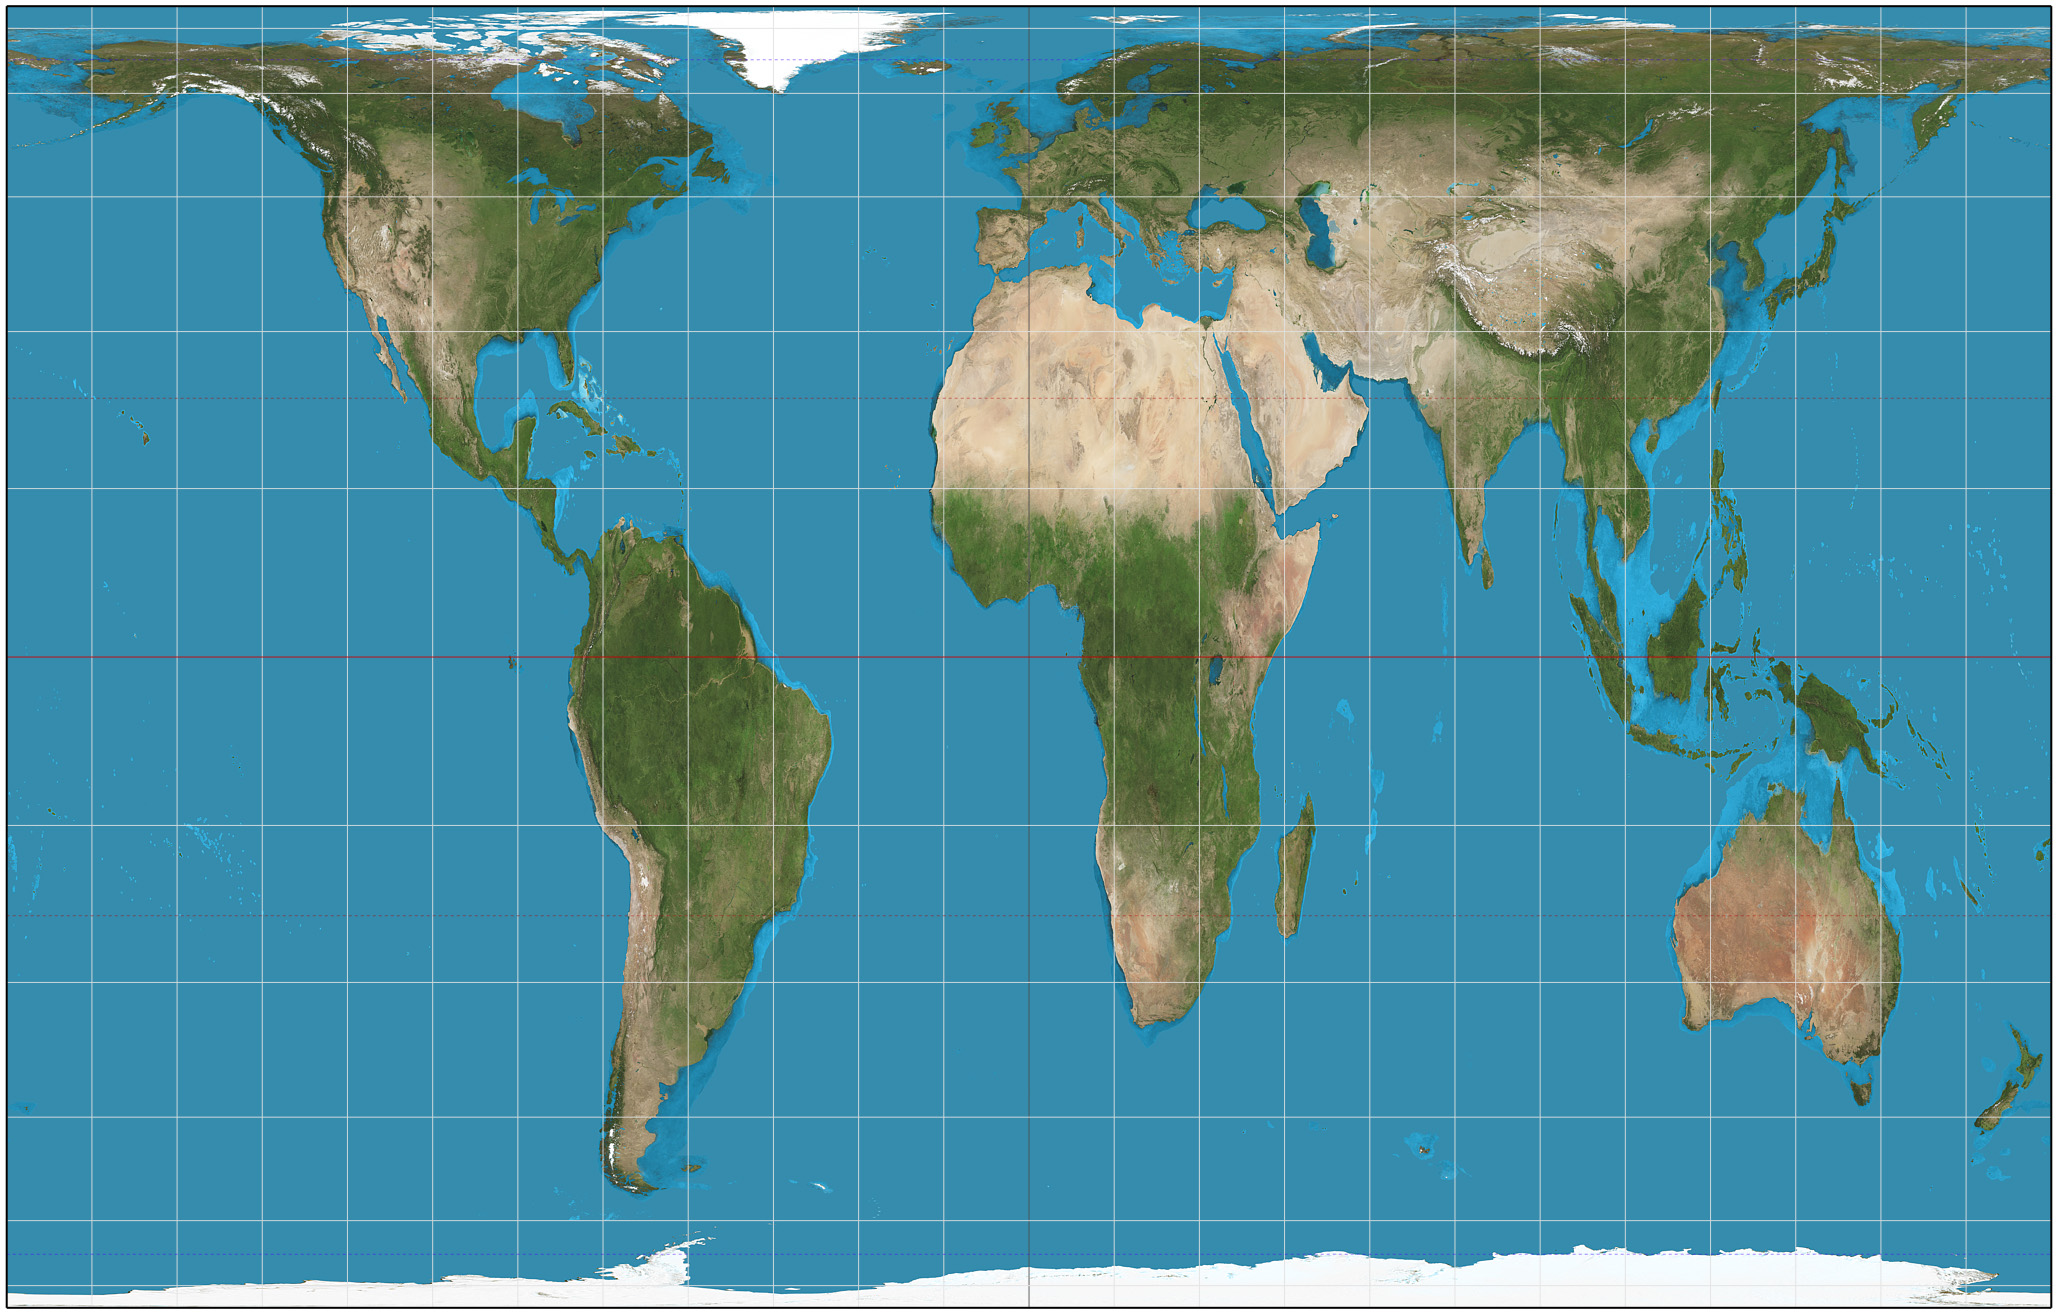 map of the world using the Gall-Peters projection